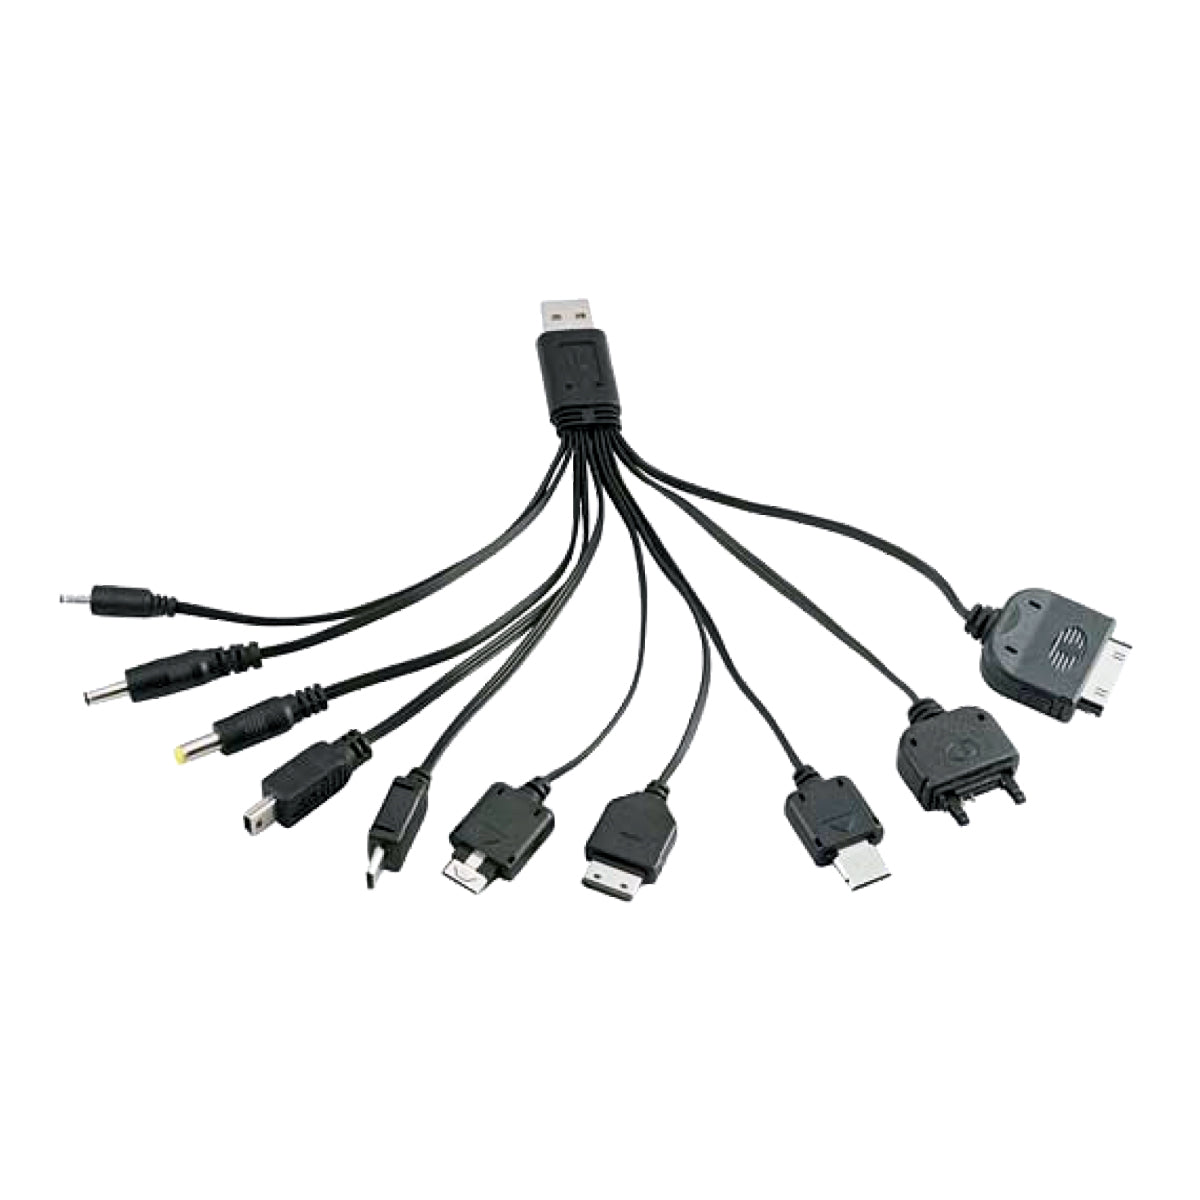 10-into-1 Multiple Charger & USB Sync Adapter Cable - Netbit UK